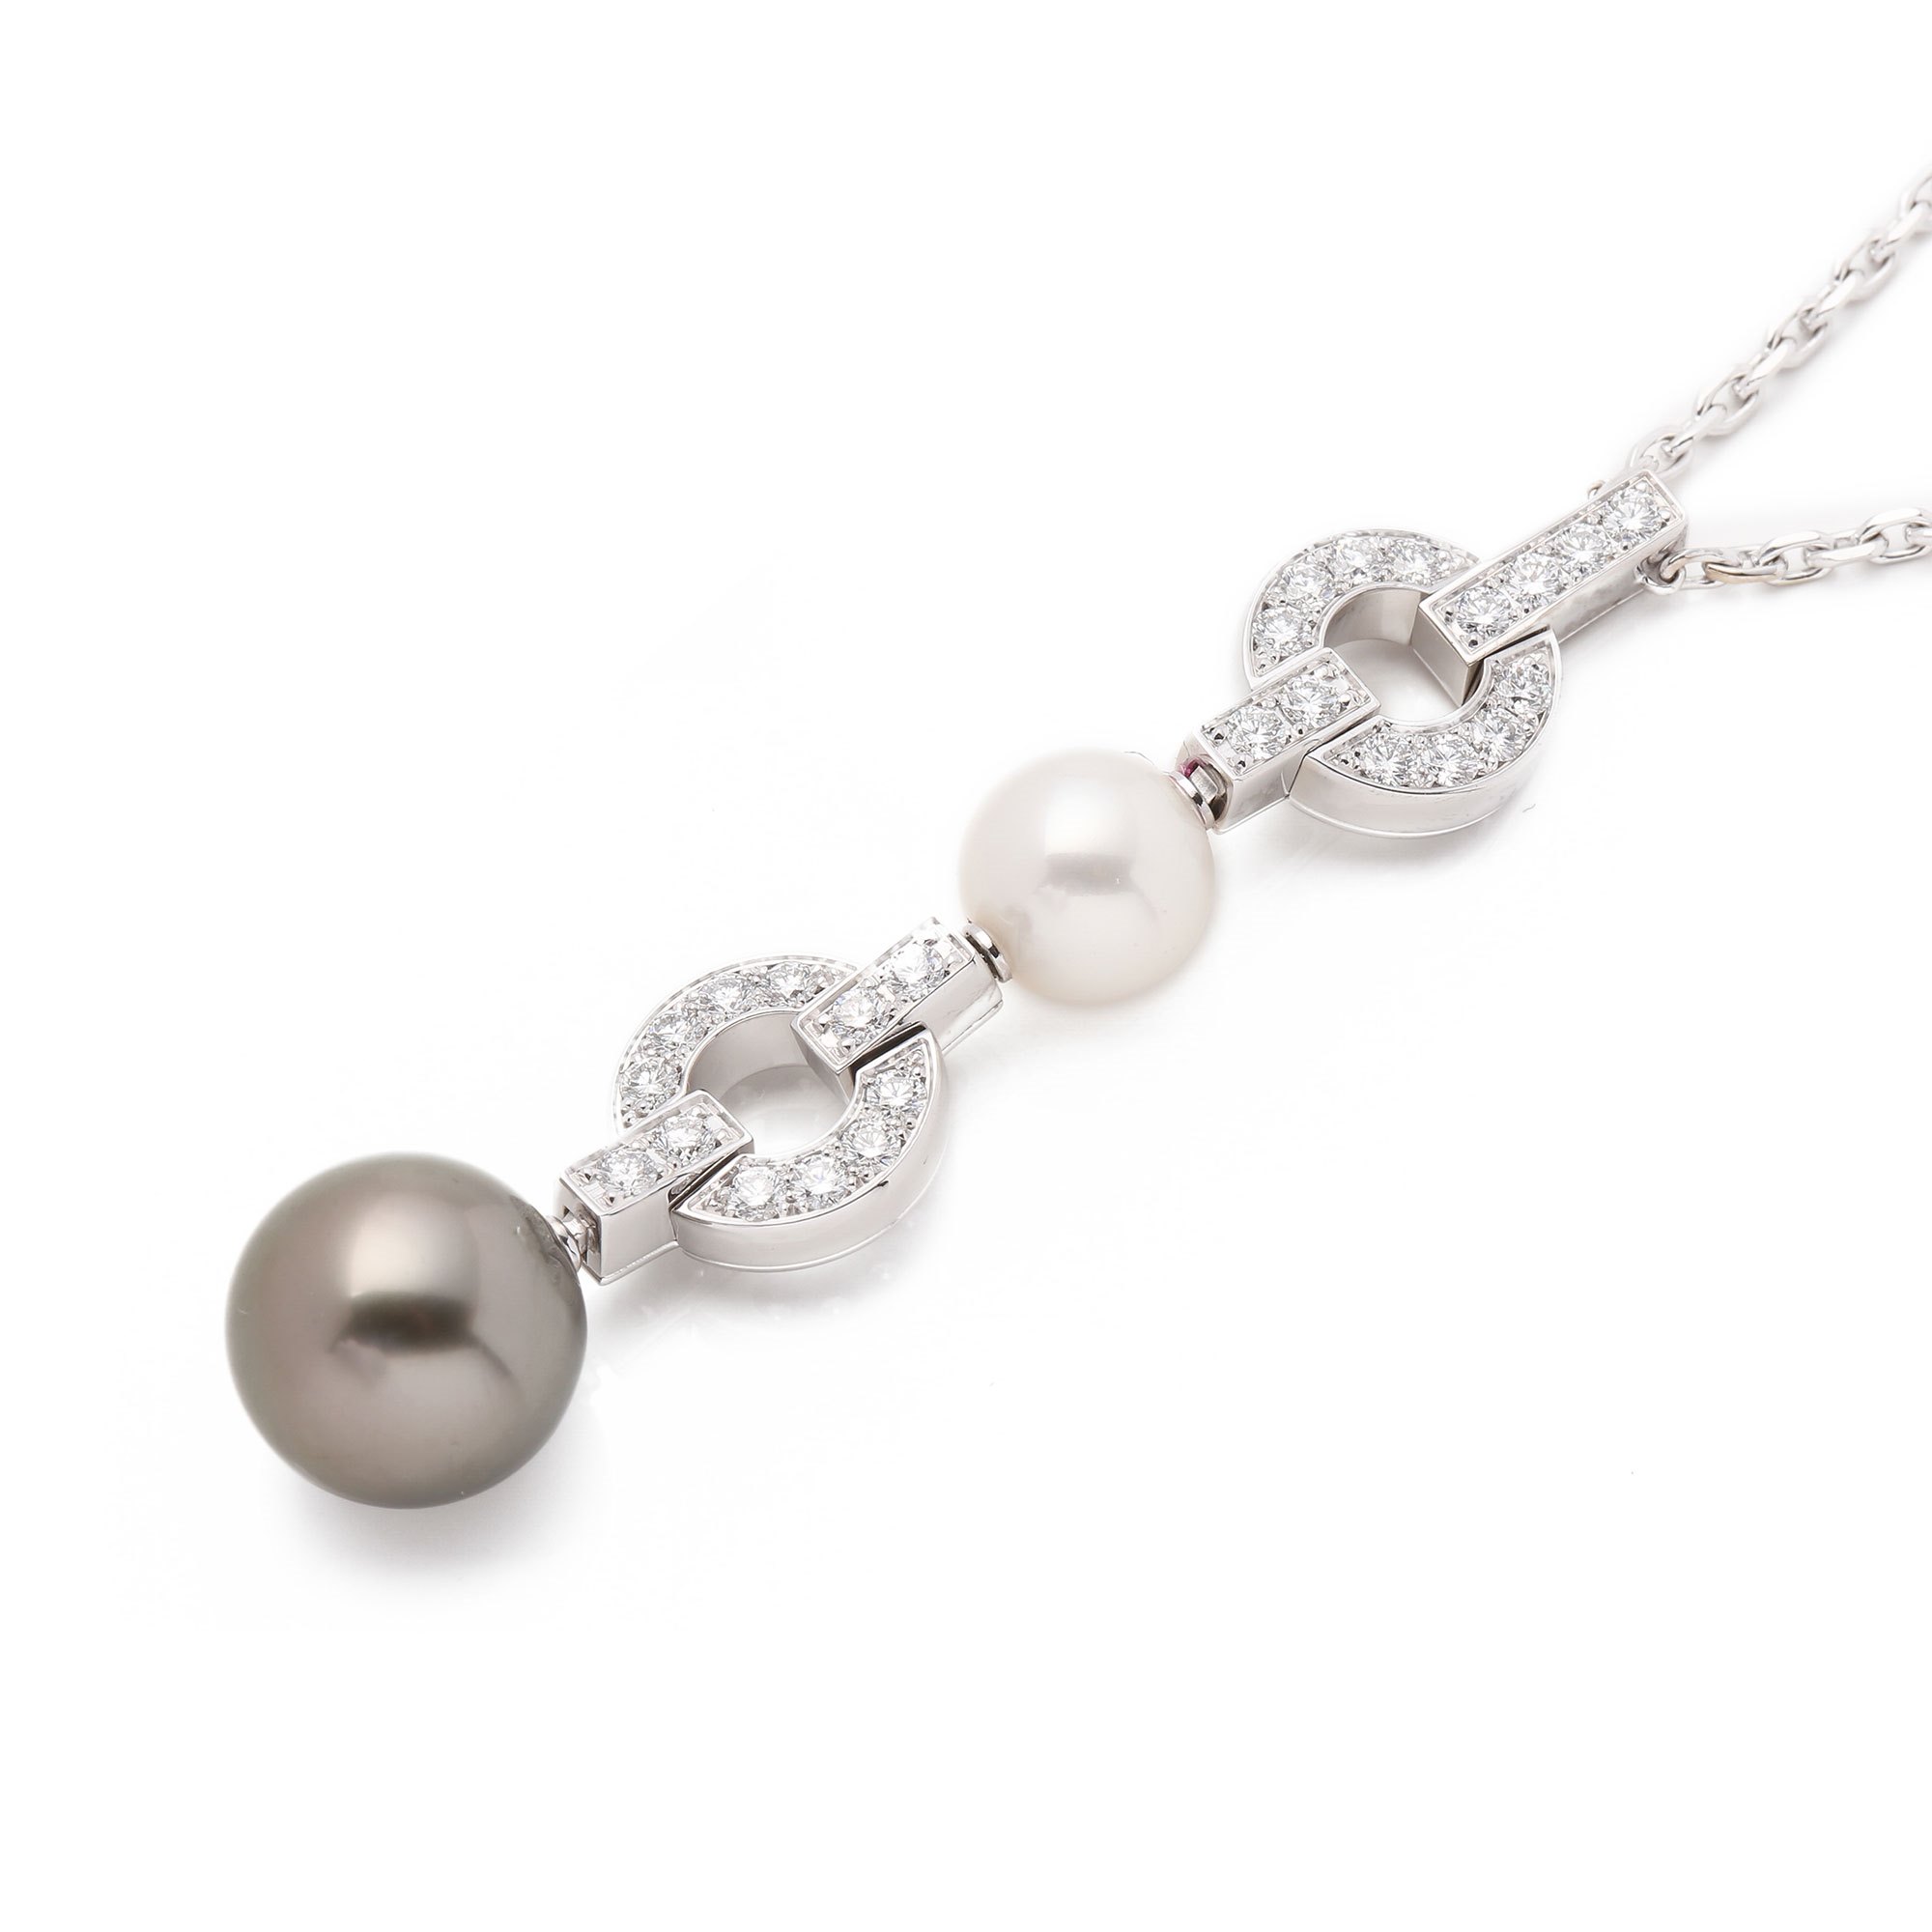 Cartier Himalia Diamond and Pearl Necklace